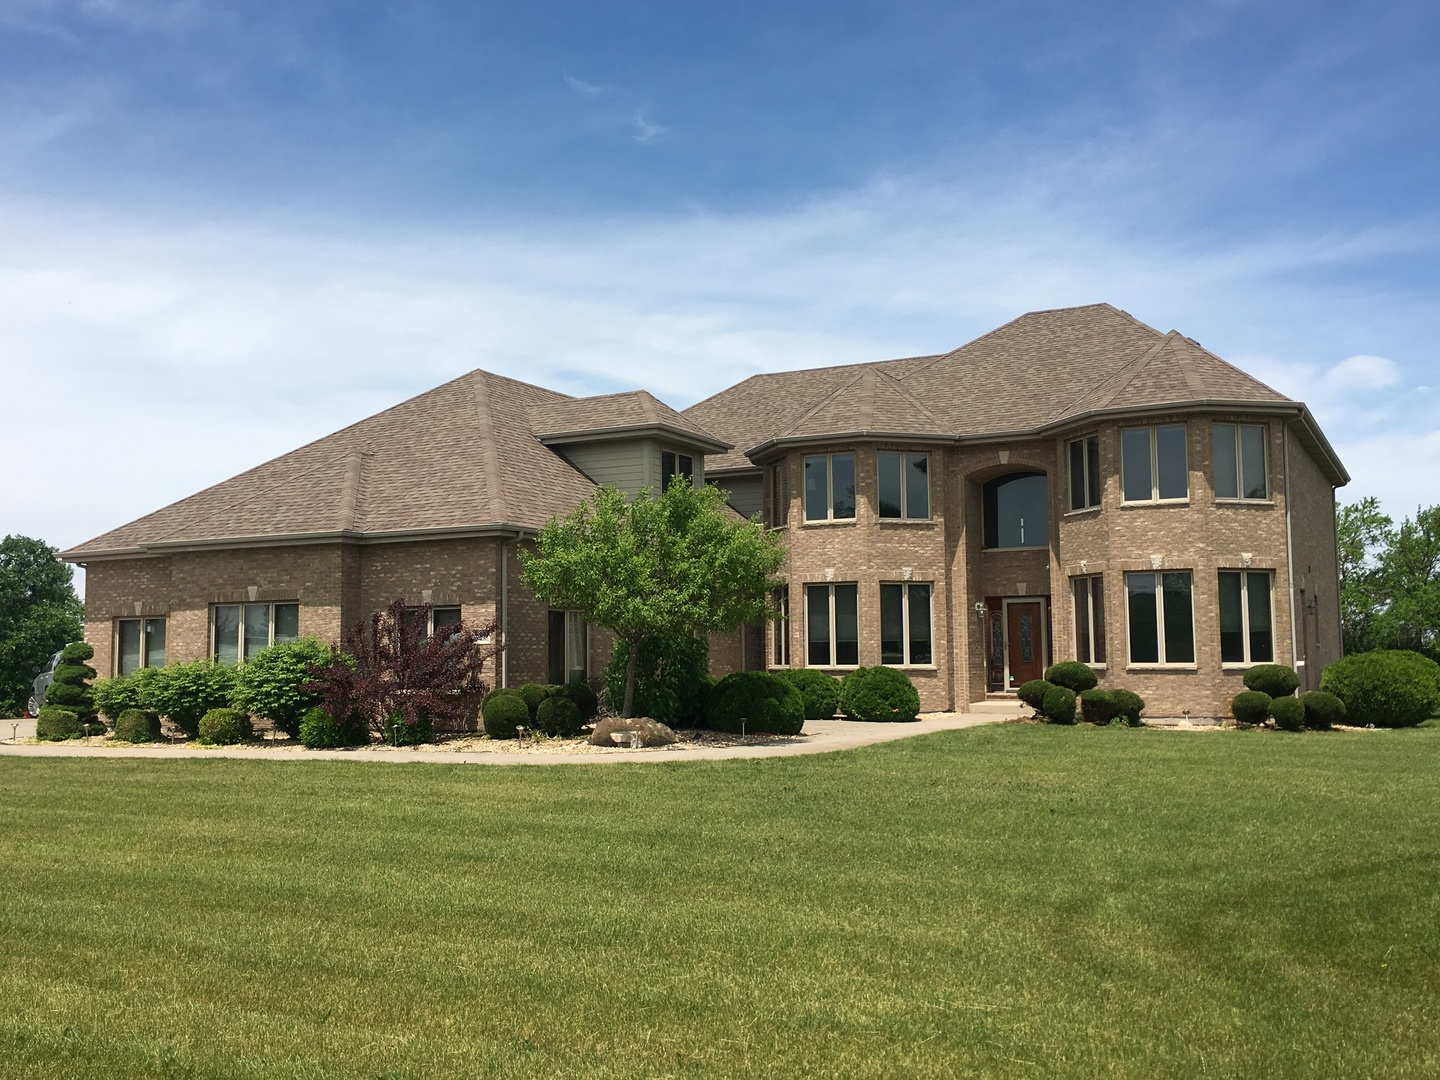 monee-il-homes-for-sale-monee-real-estate-bowers-realty-group